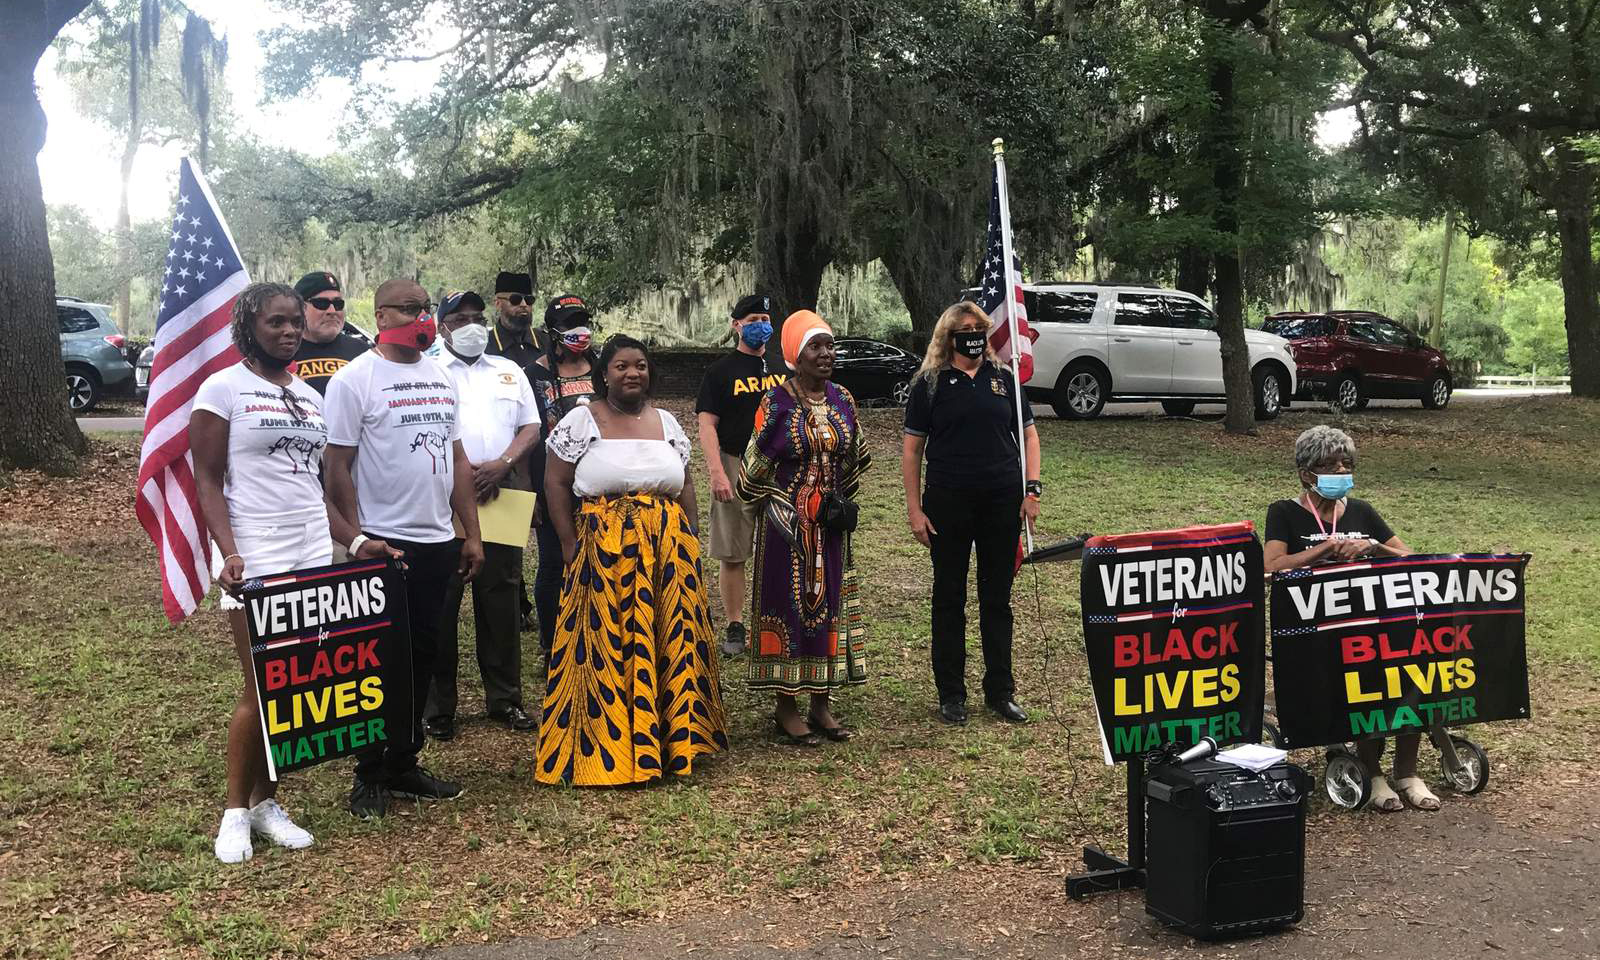 Brand new veterans group says they want justice and will “take it by any means necessary”